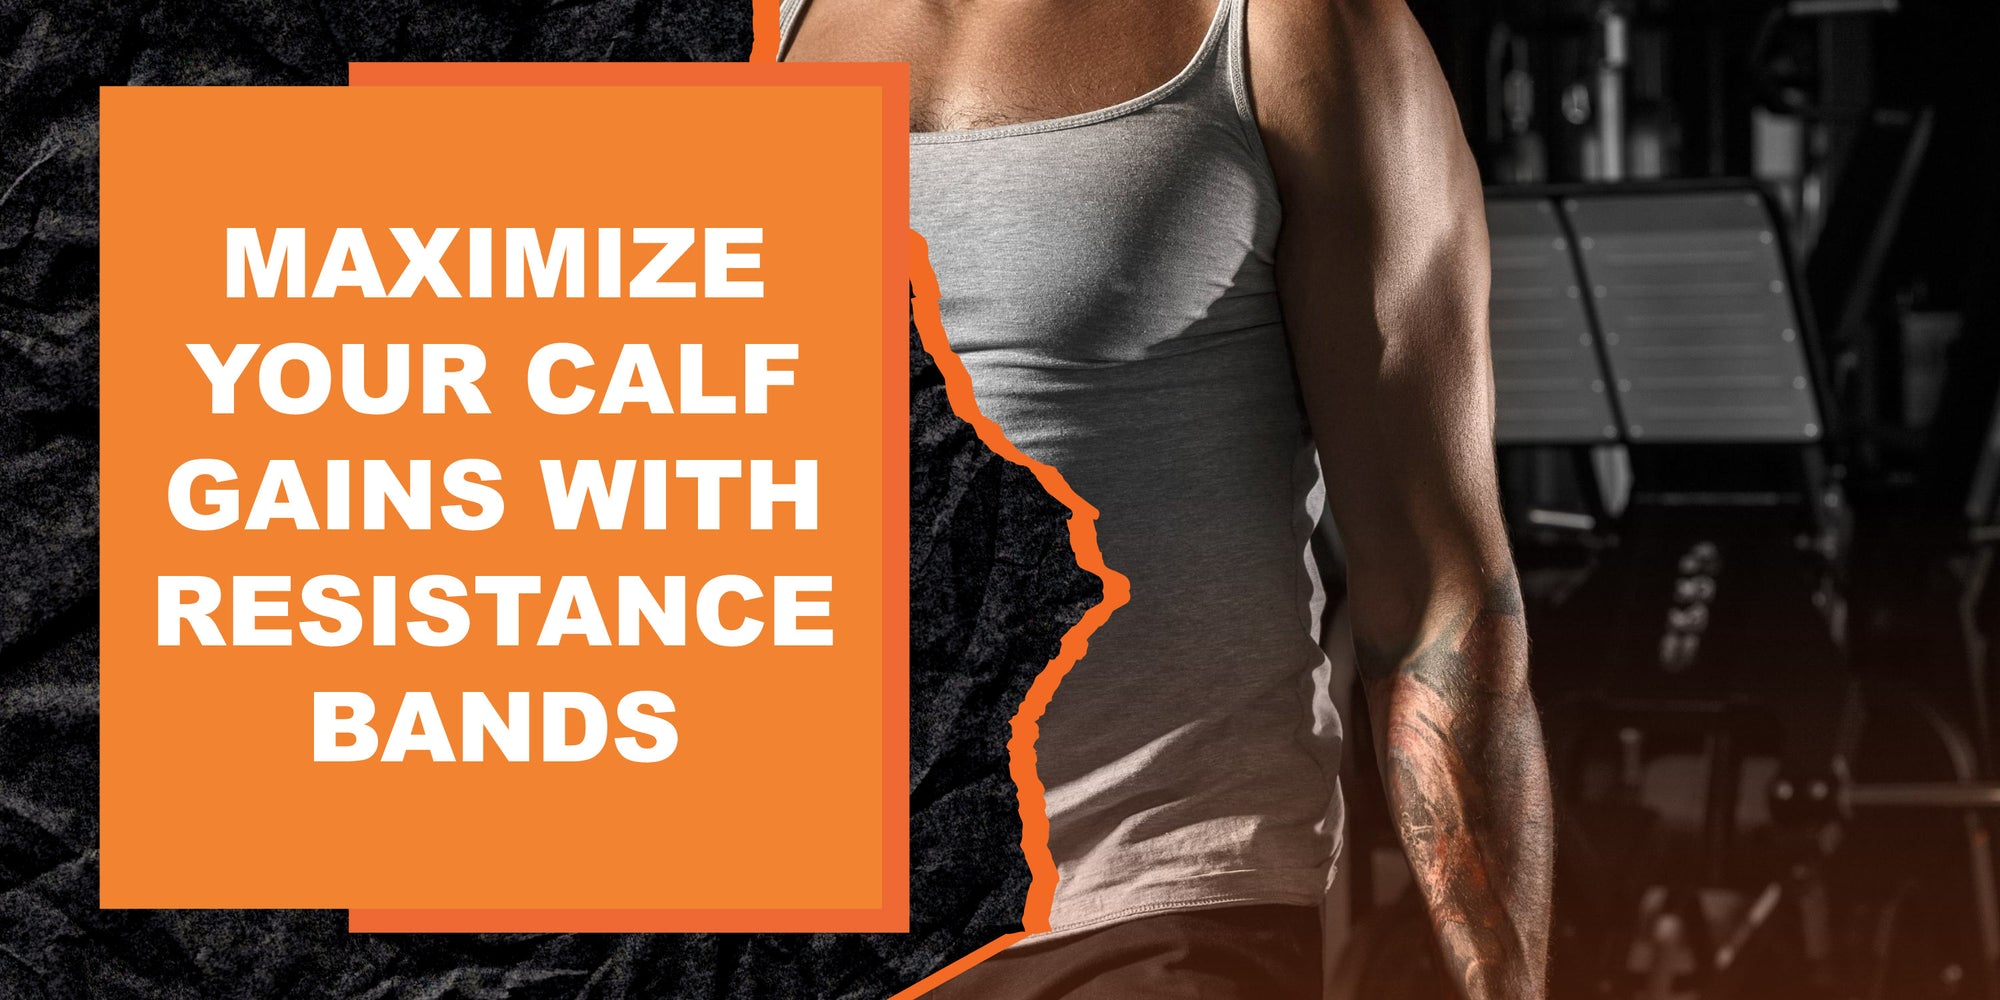 Maximize Your Calf Gains with Resistance Bands